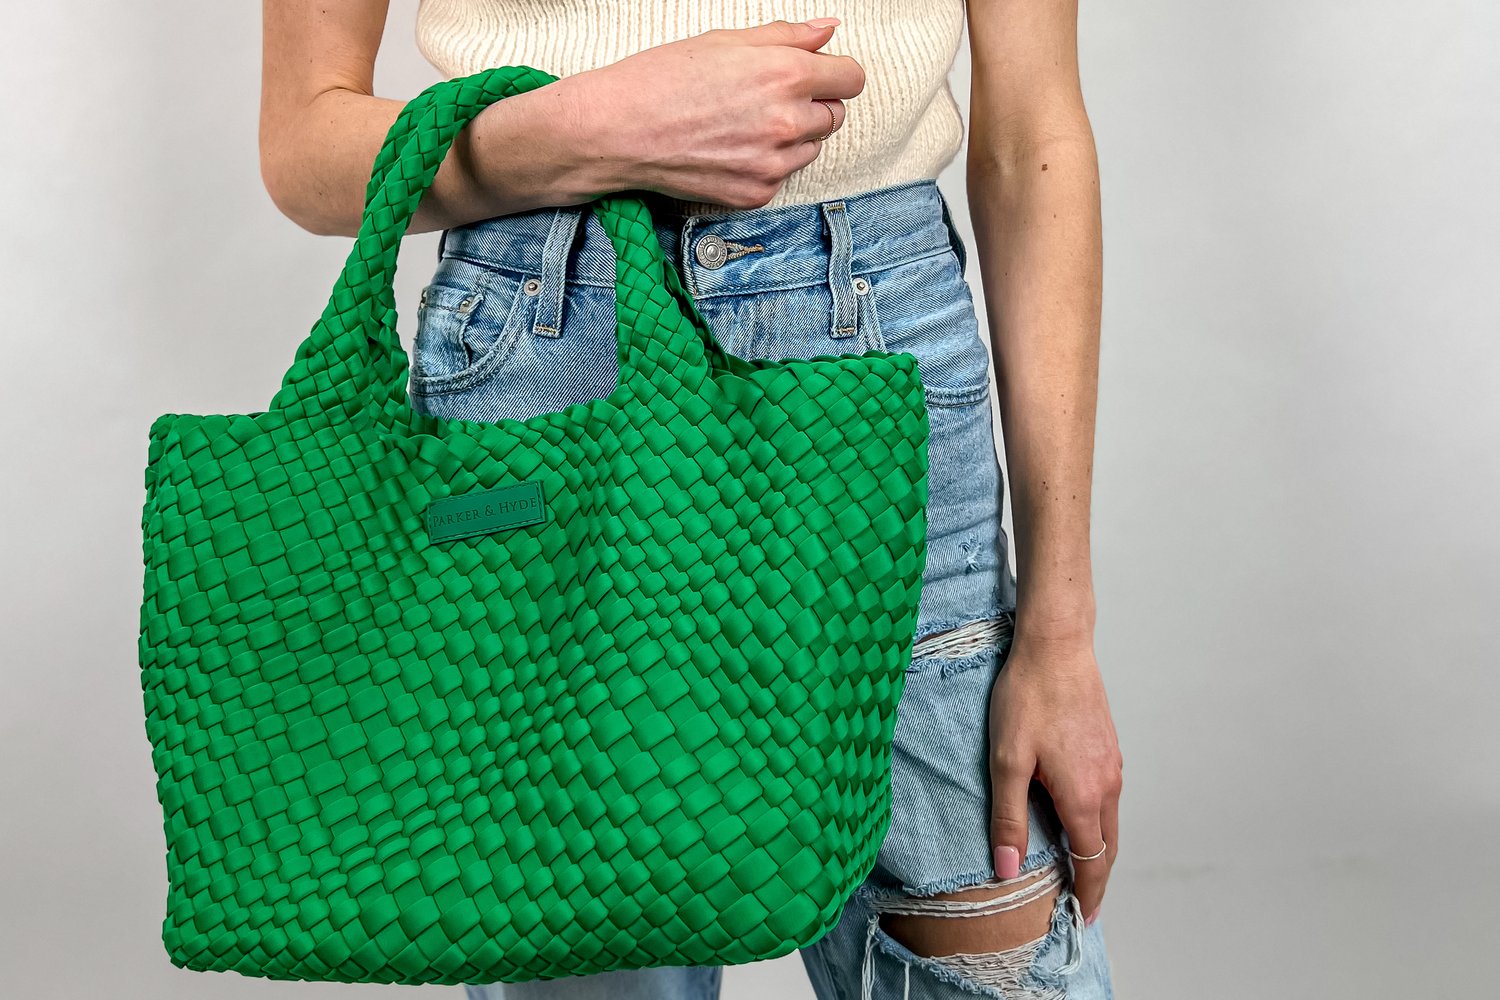 Kelly Tweed & Leather Tote Bag - Green and Pink Plaid